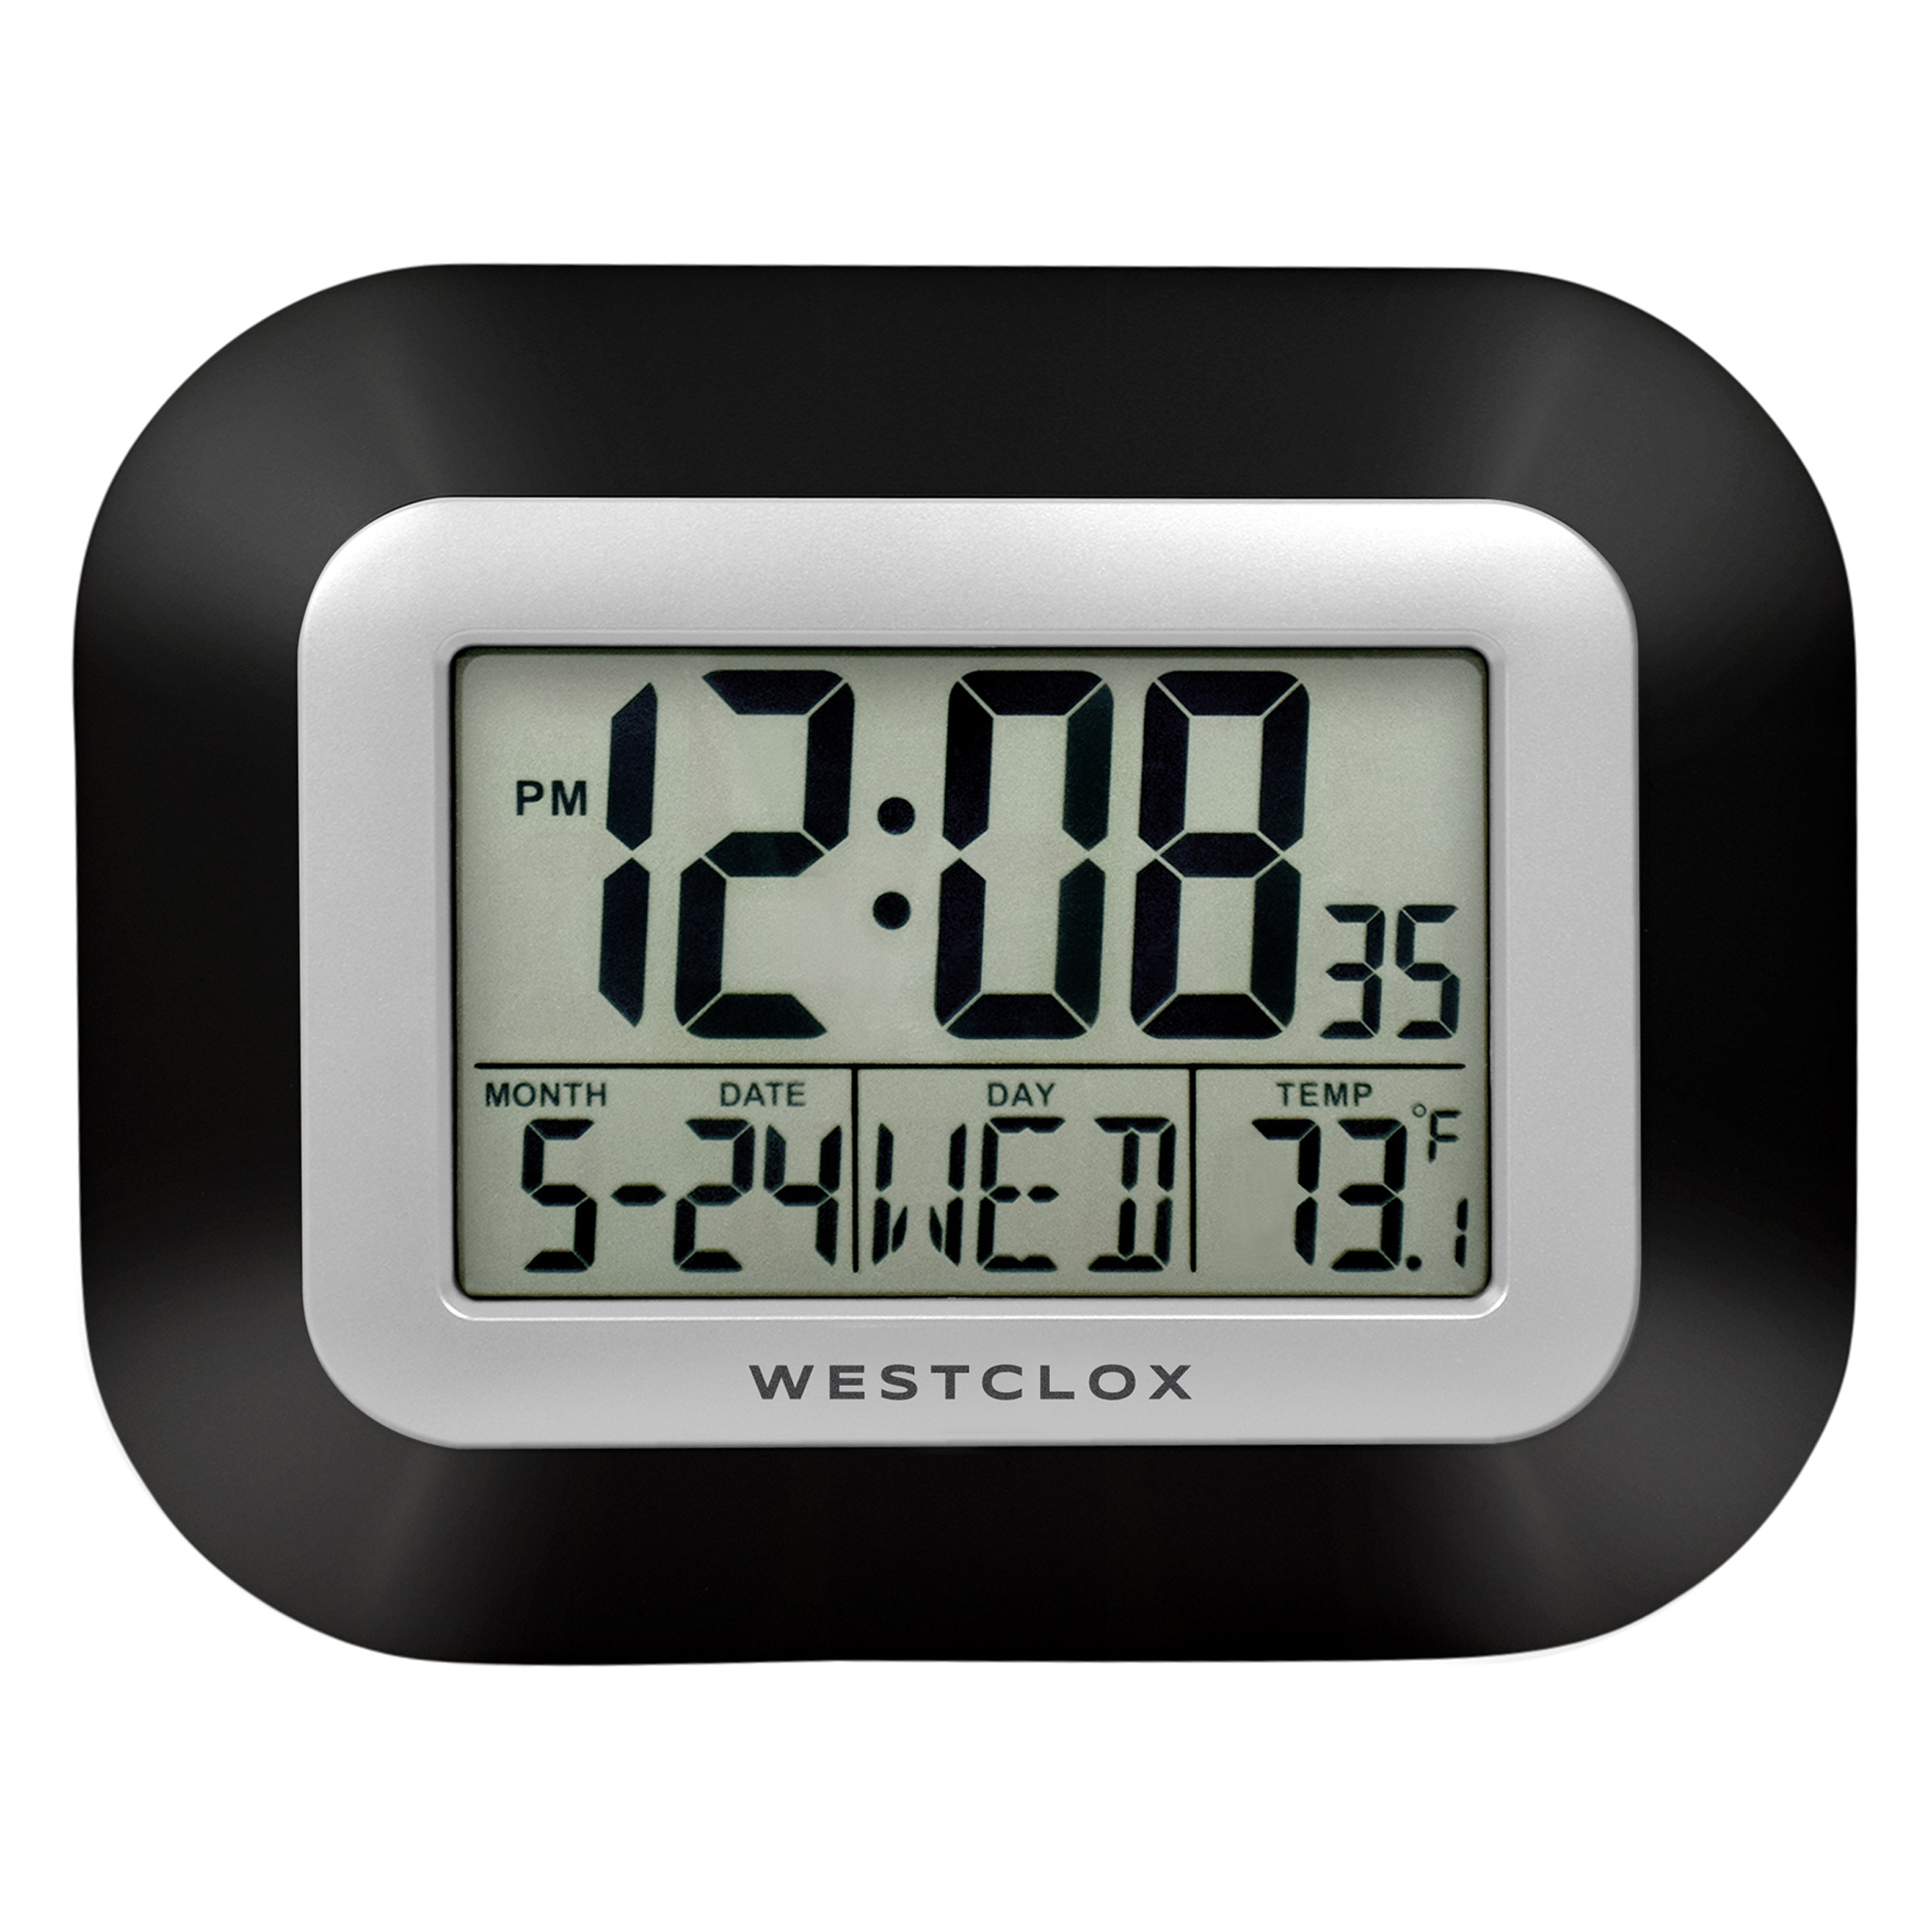 Westclox Classic Black Digital LCD Wall Clock with Date, Day and Temperature - image 1 of 6